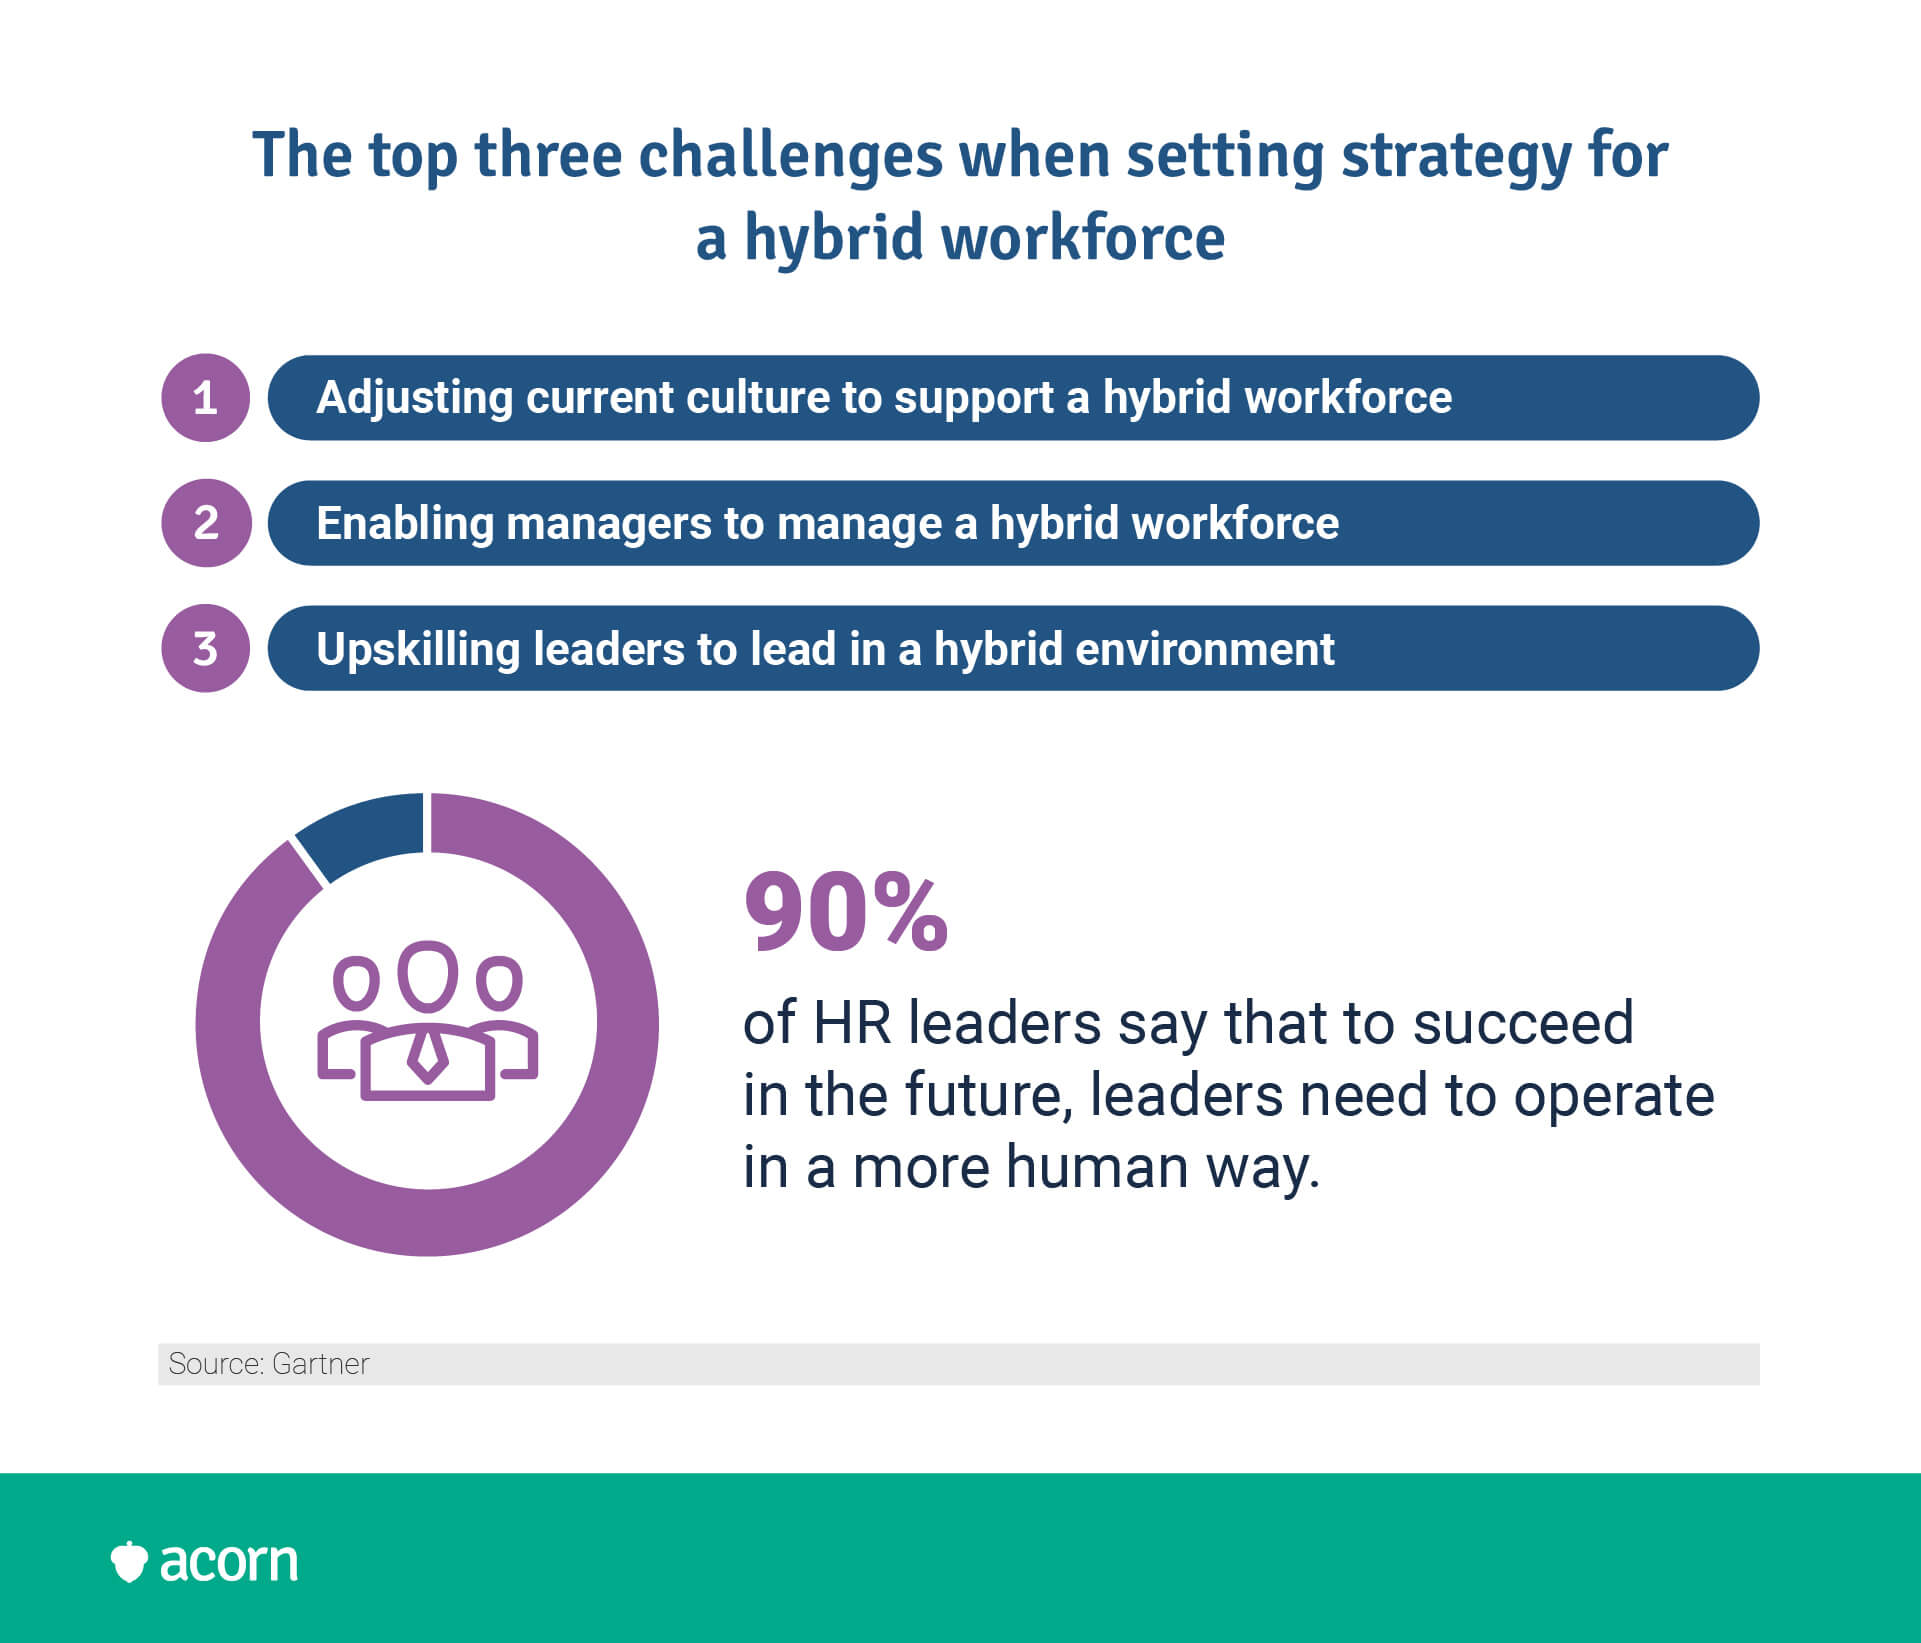 infographic showing gartner's top 3 challenges for a hybrid workforce